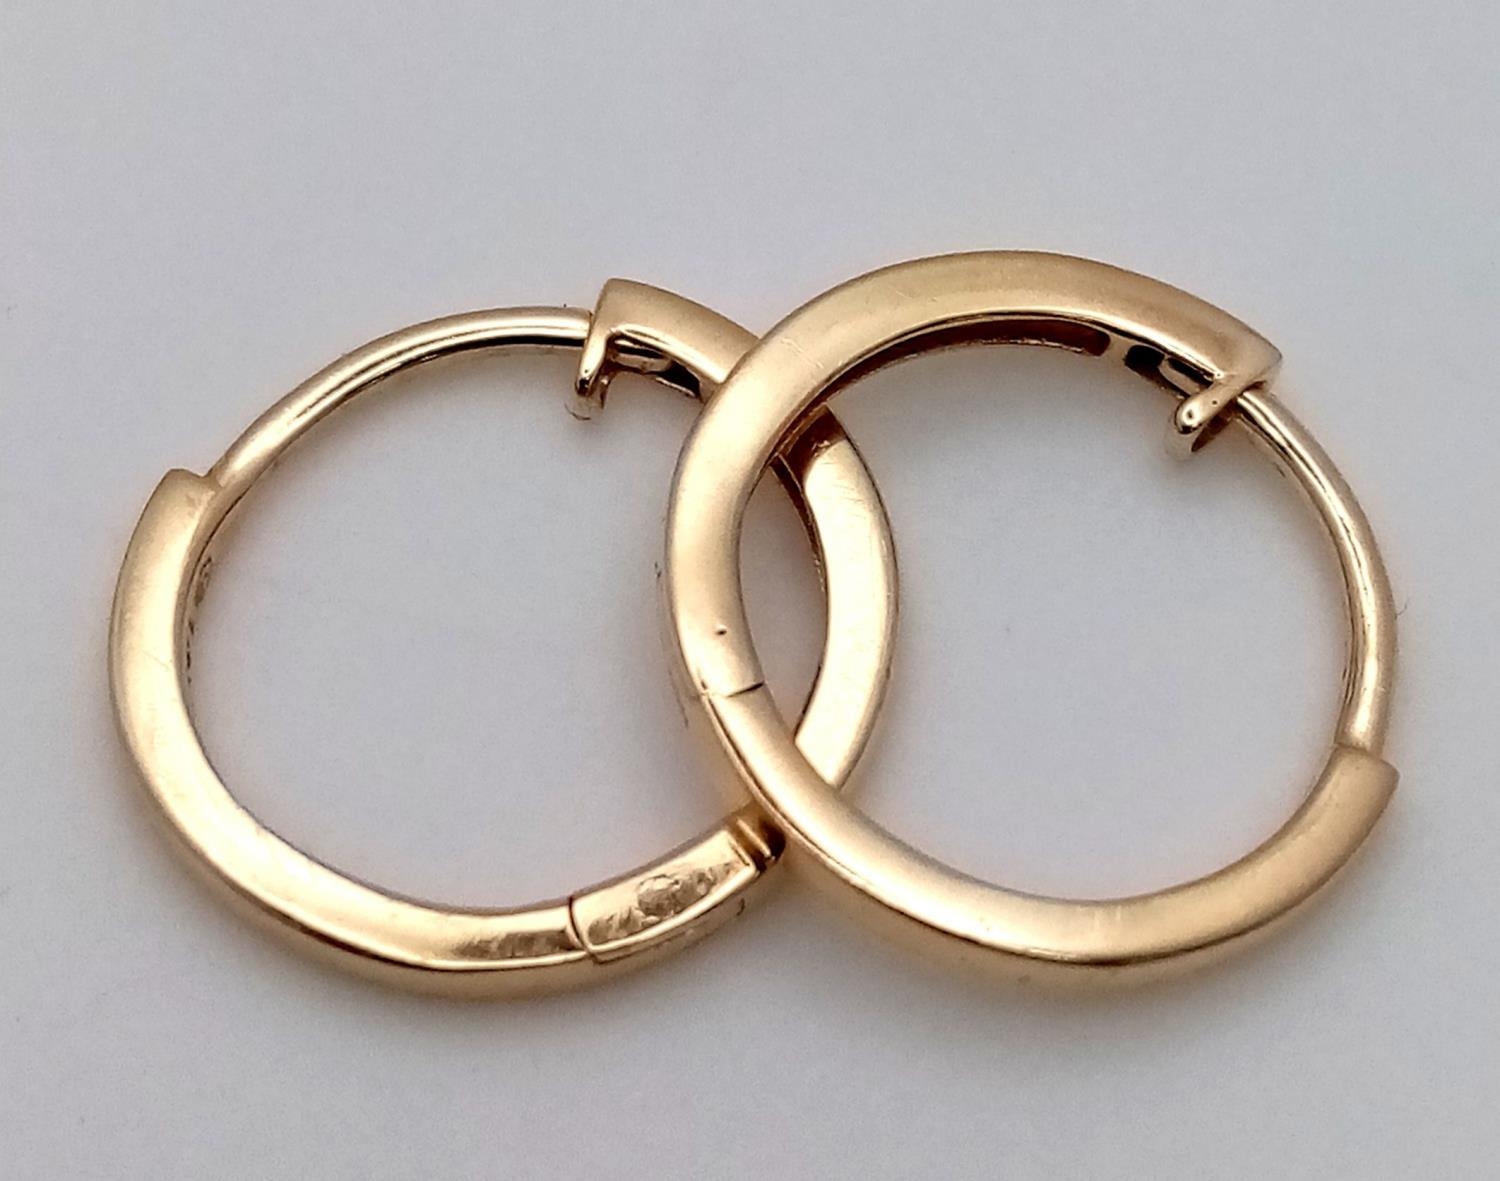 A Pair of Designer Massika 14K Yellow Gold Small Hoop Earrings. 0.8g total weight.